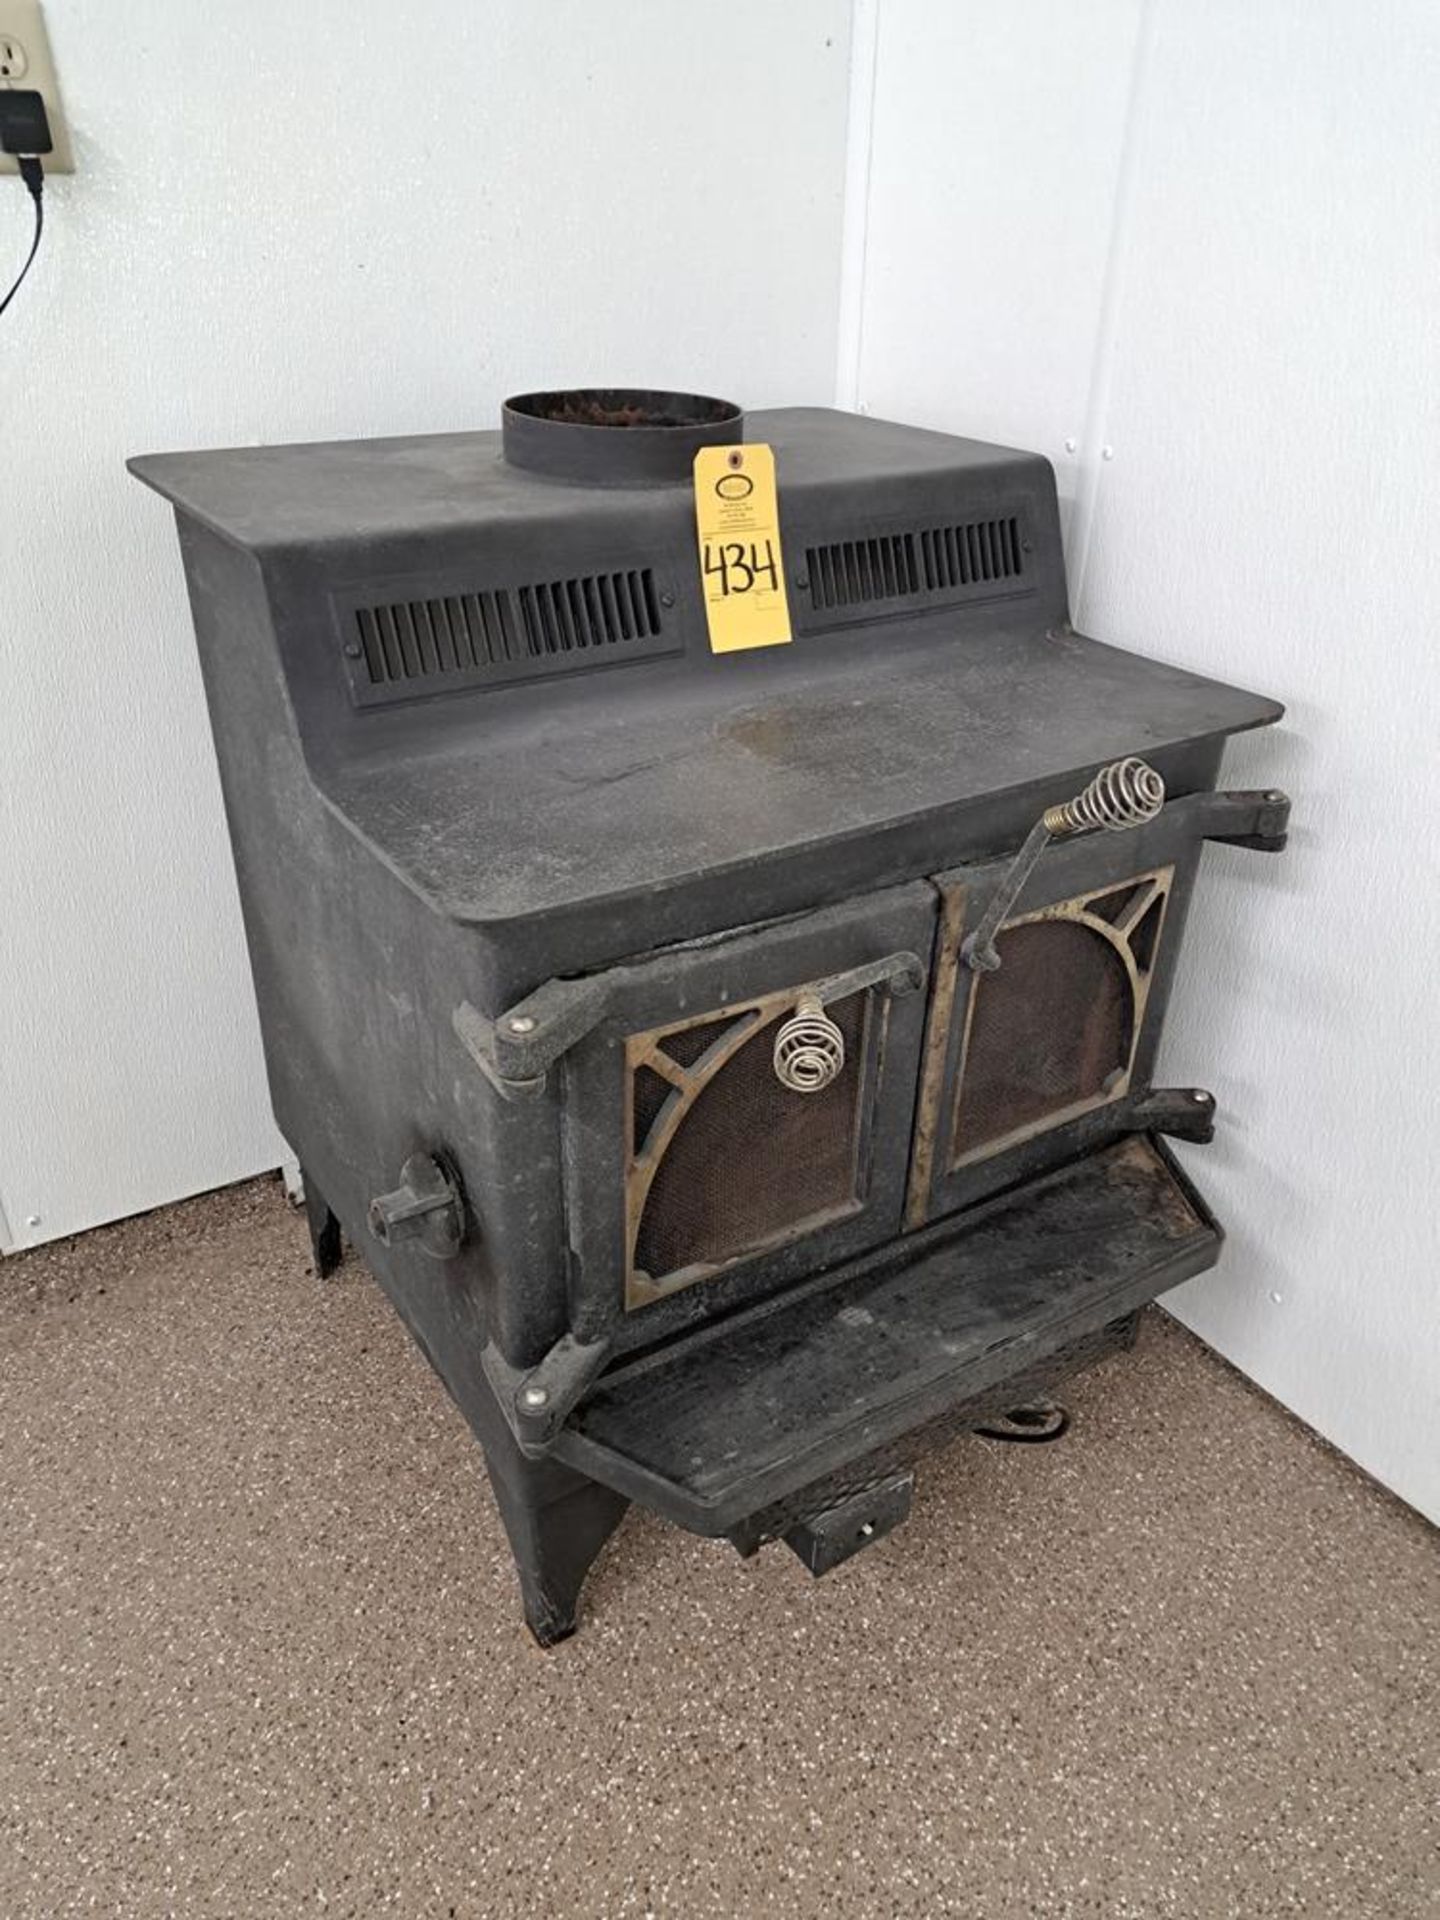 Wood Burning Stove, 30" wide X 32" deep X 36" tall (Required Loading Fee: $50.00) NO HAND CARRY (